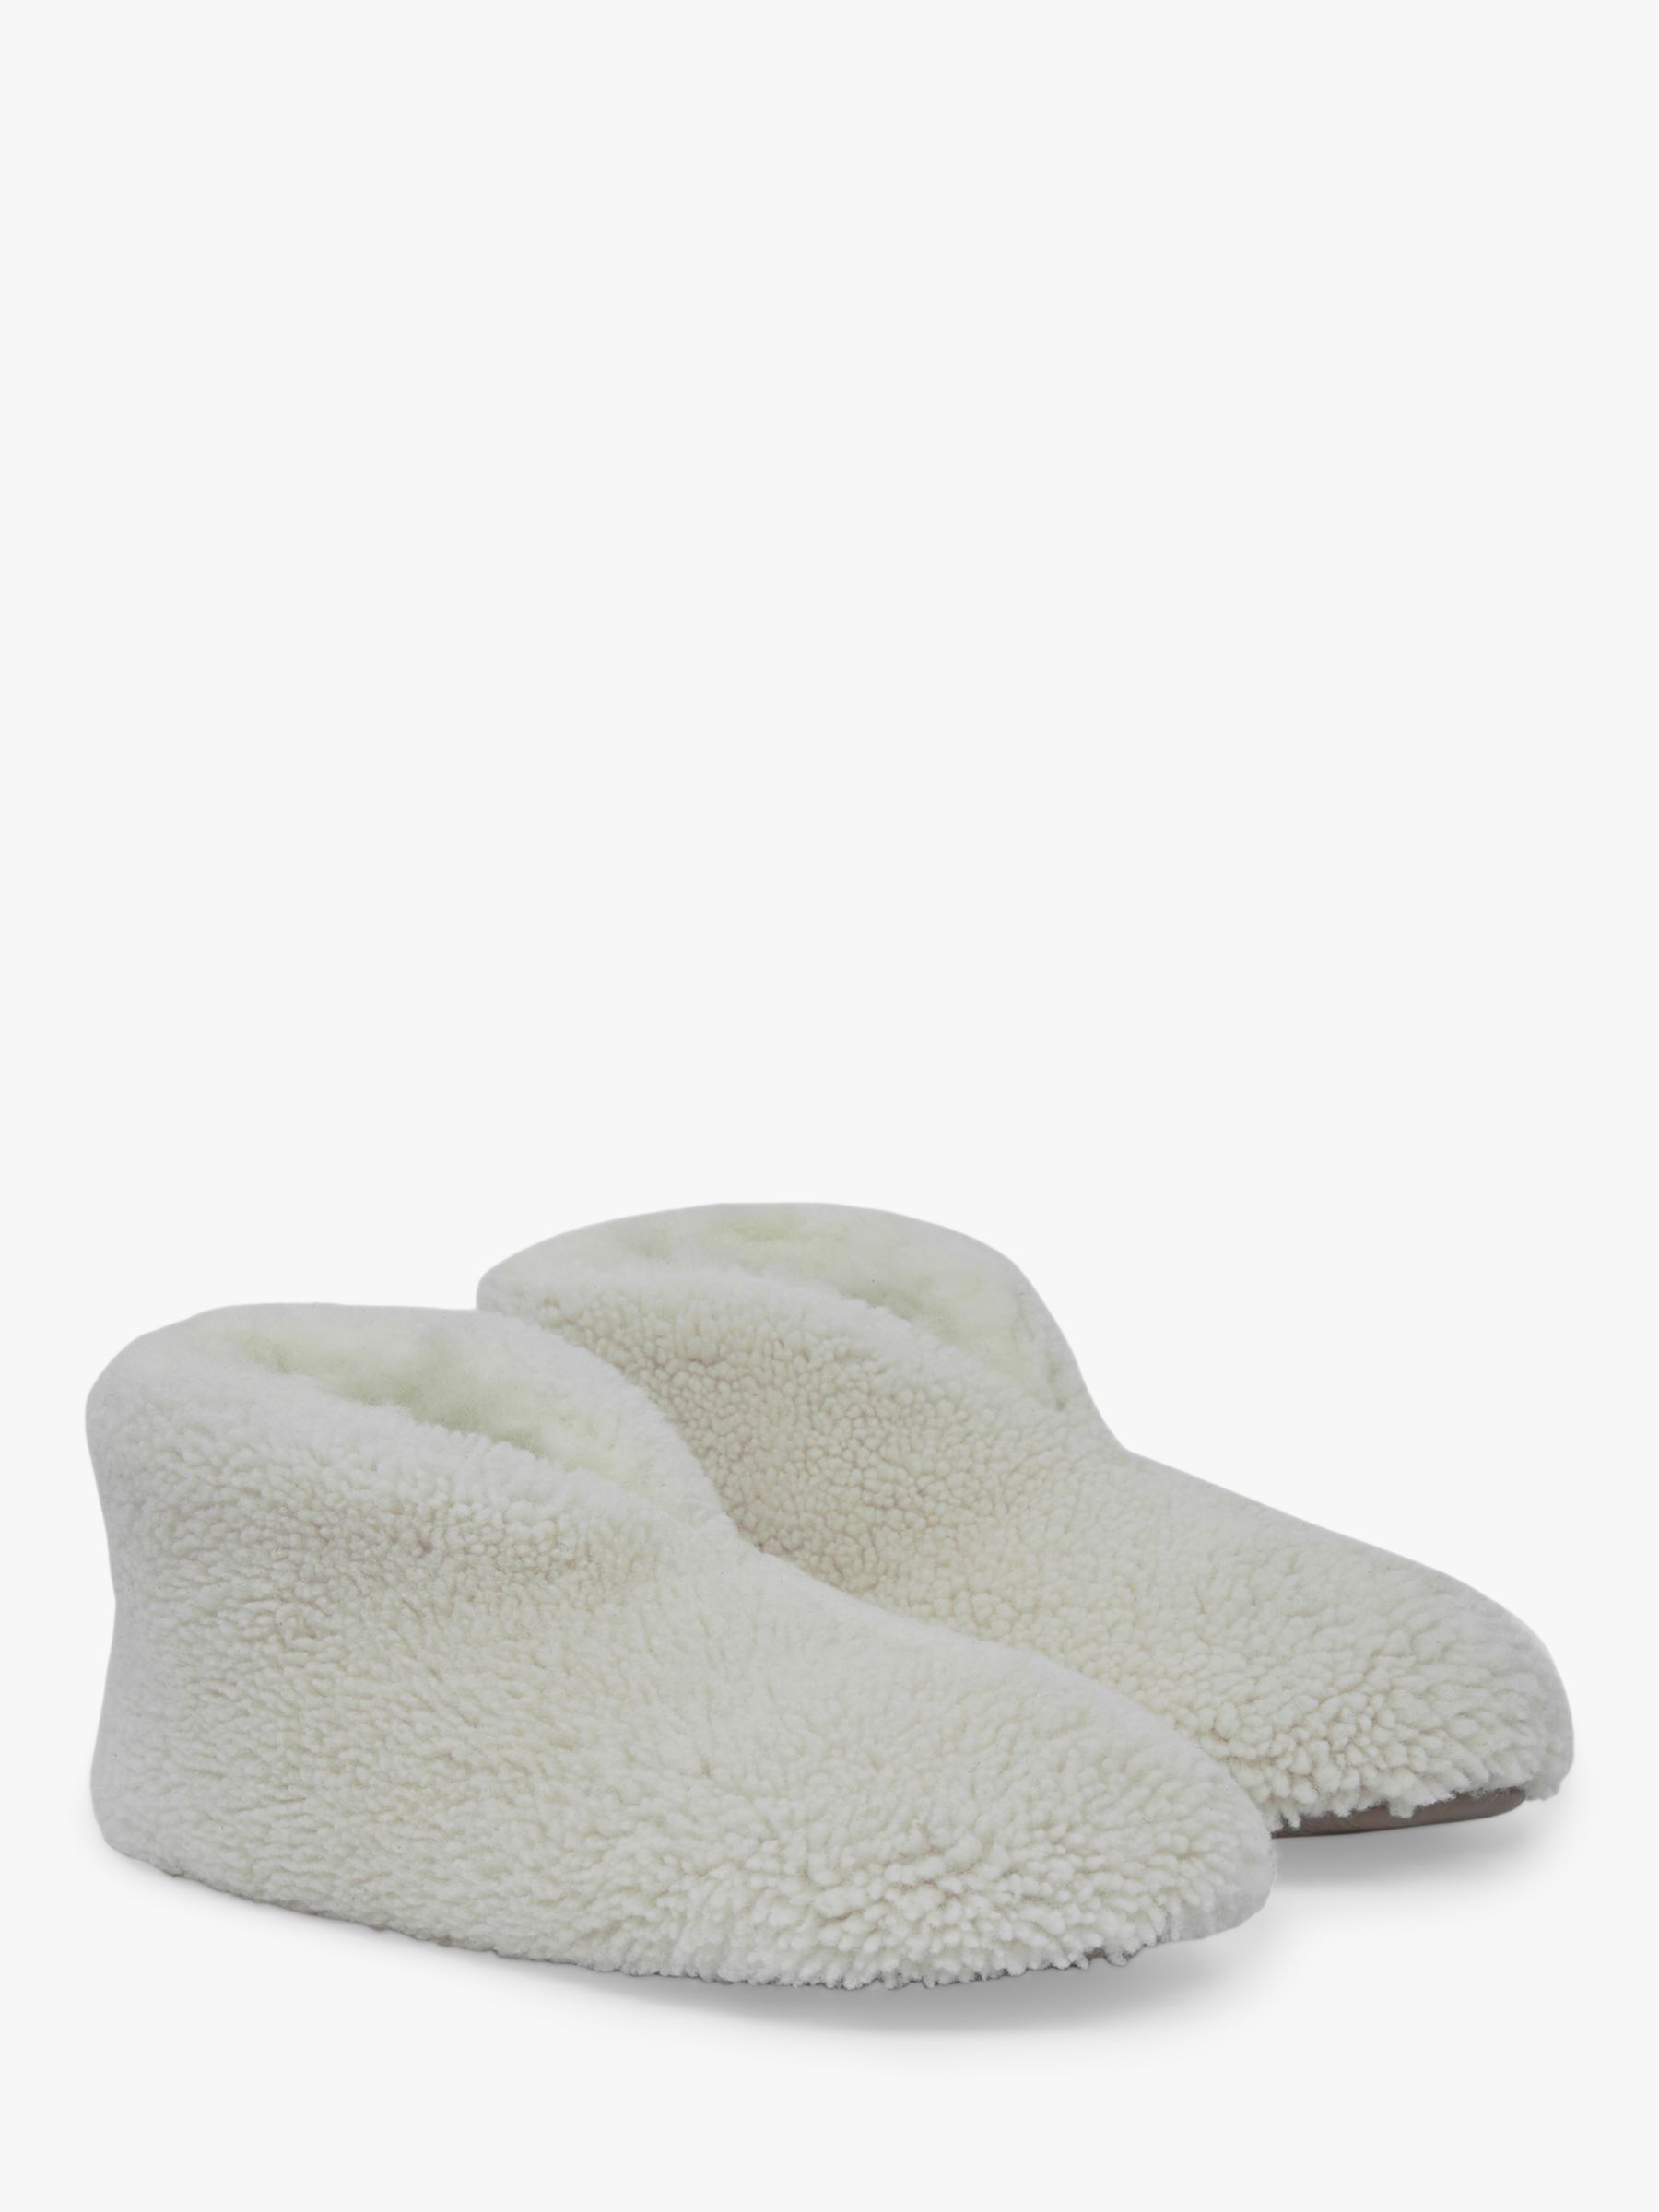 Buy Celtic & Co.Teddy Sheepskin Soft Sole Bootee Slippers, Ecru Online at johnlewis.com